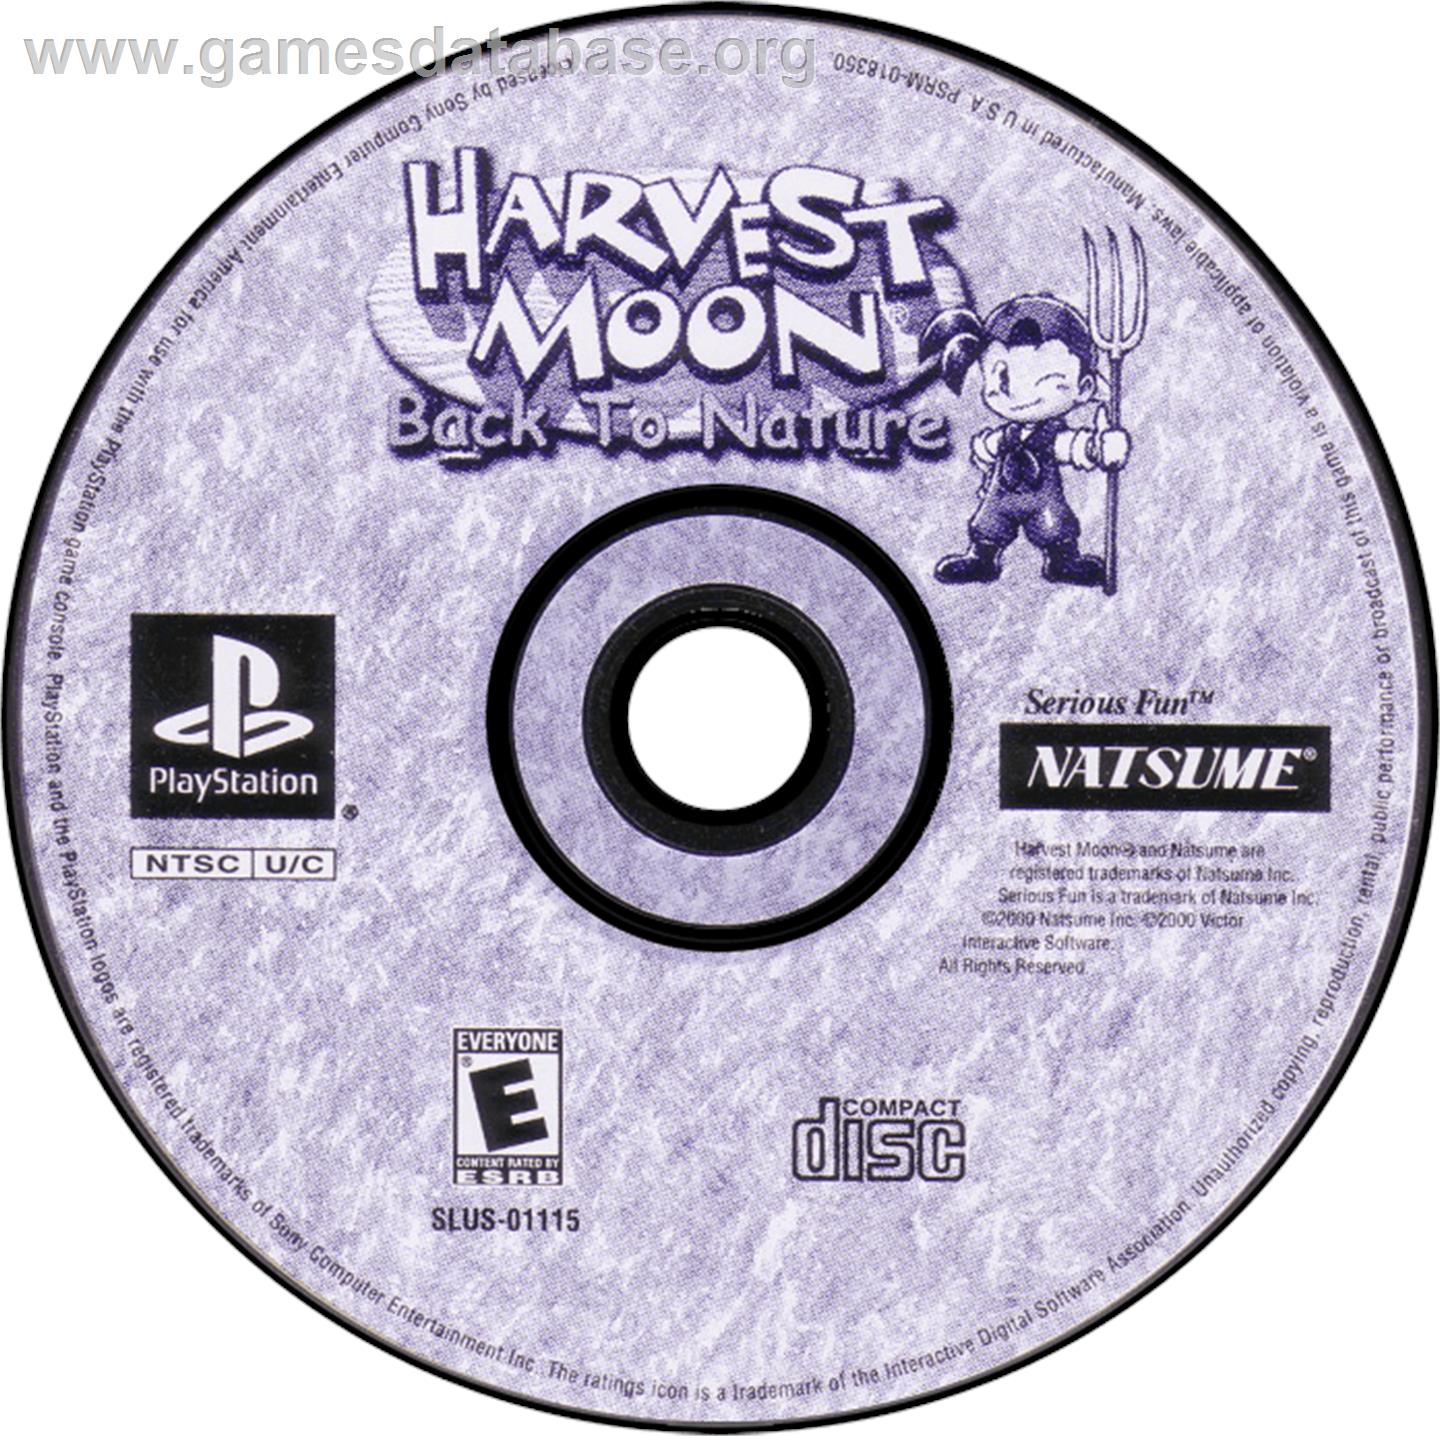 Harvest Moon: Back to Nature - Sony Playstation - Artwork - Disc